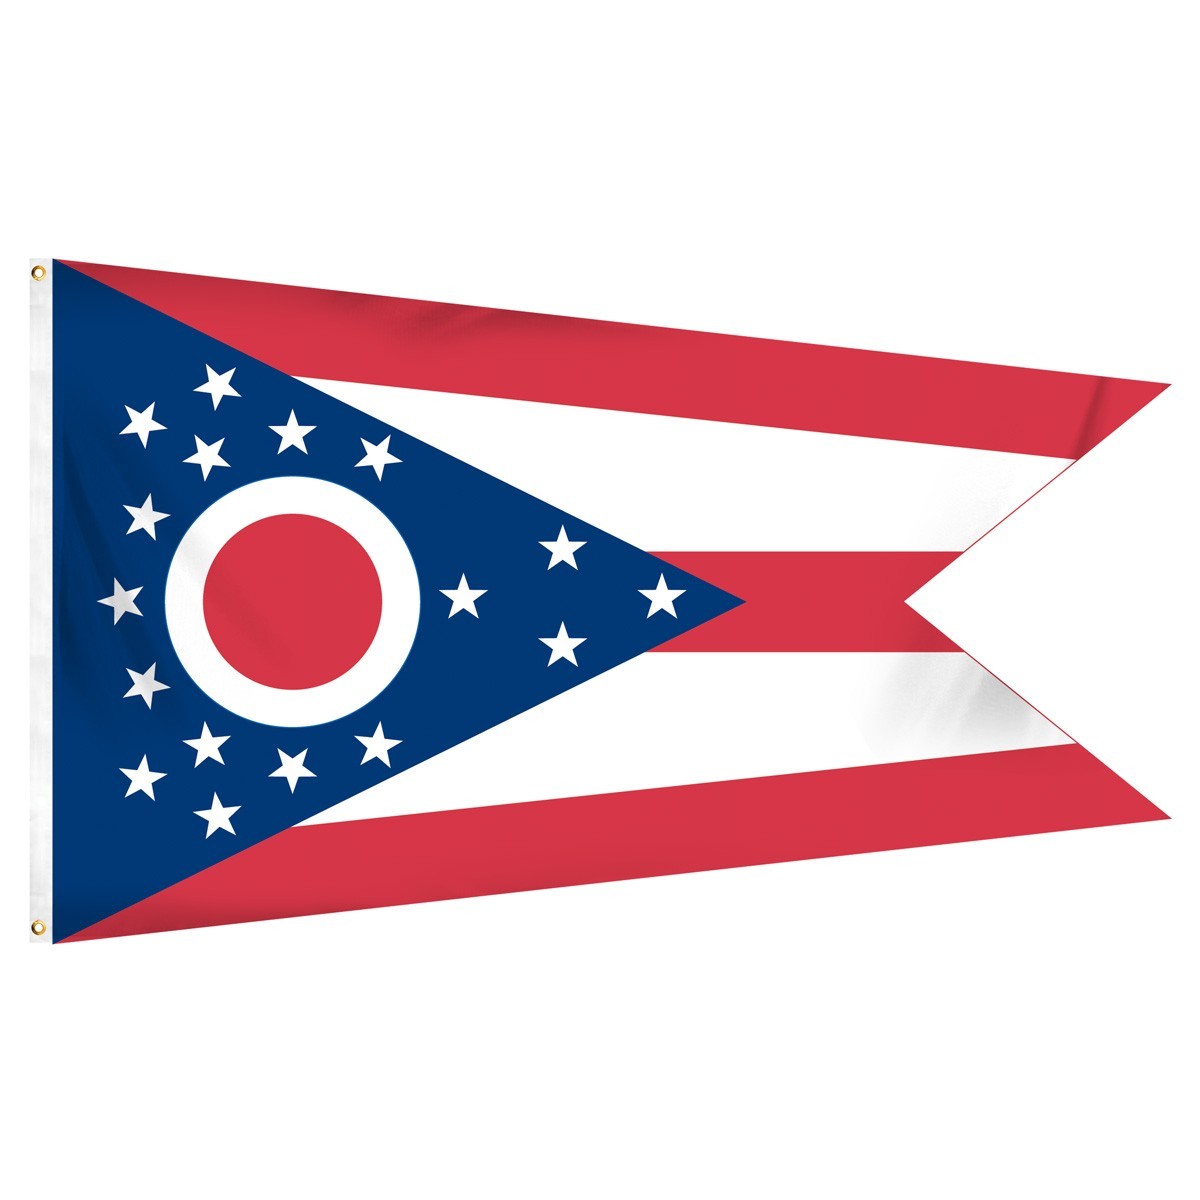 Ohio polyester nylon classroom flags for sale